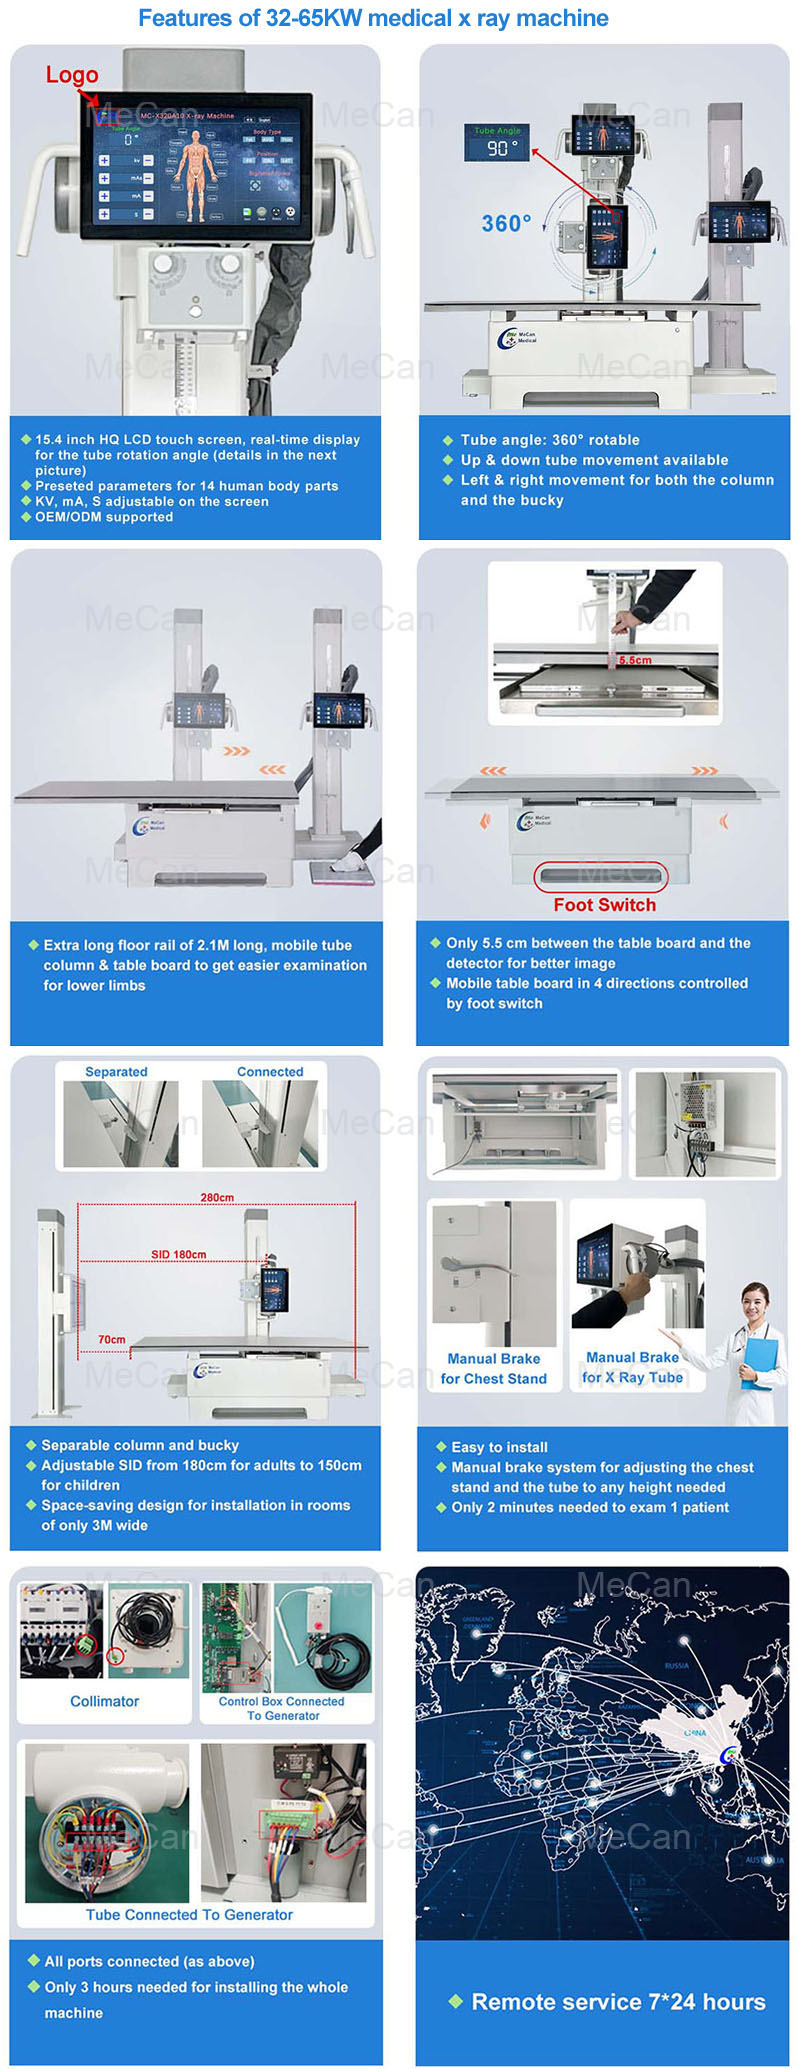 Features of 32-65KW medical x ray machine